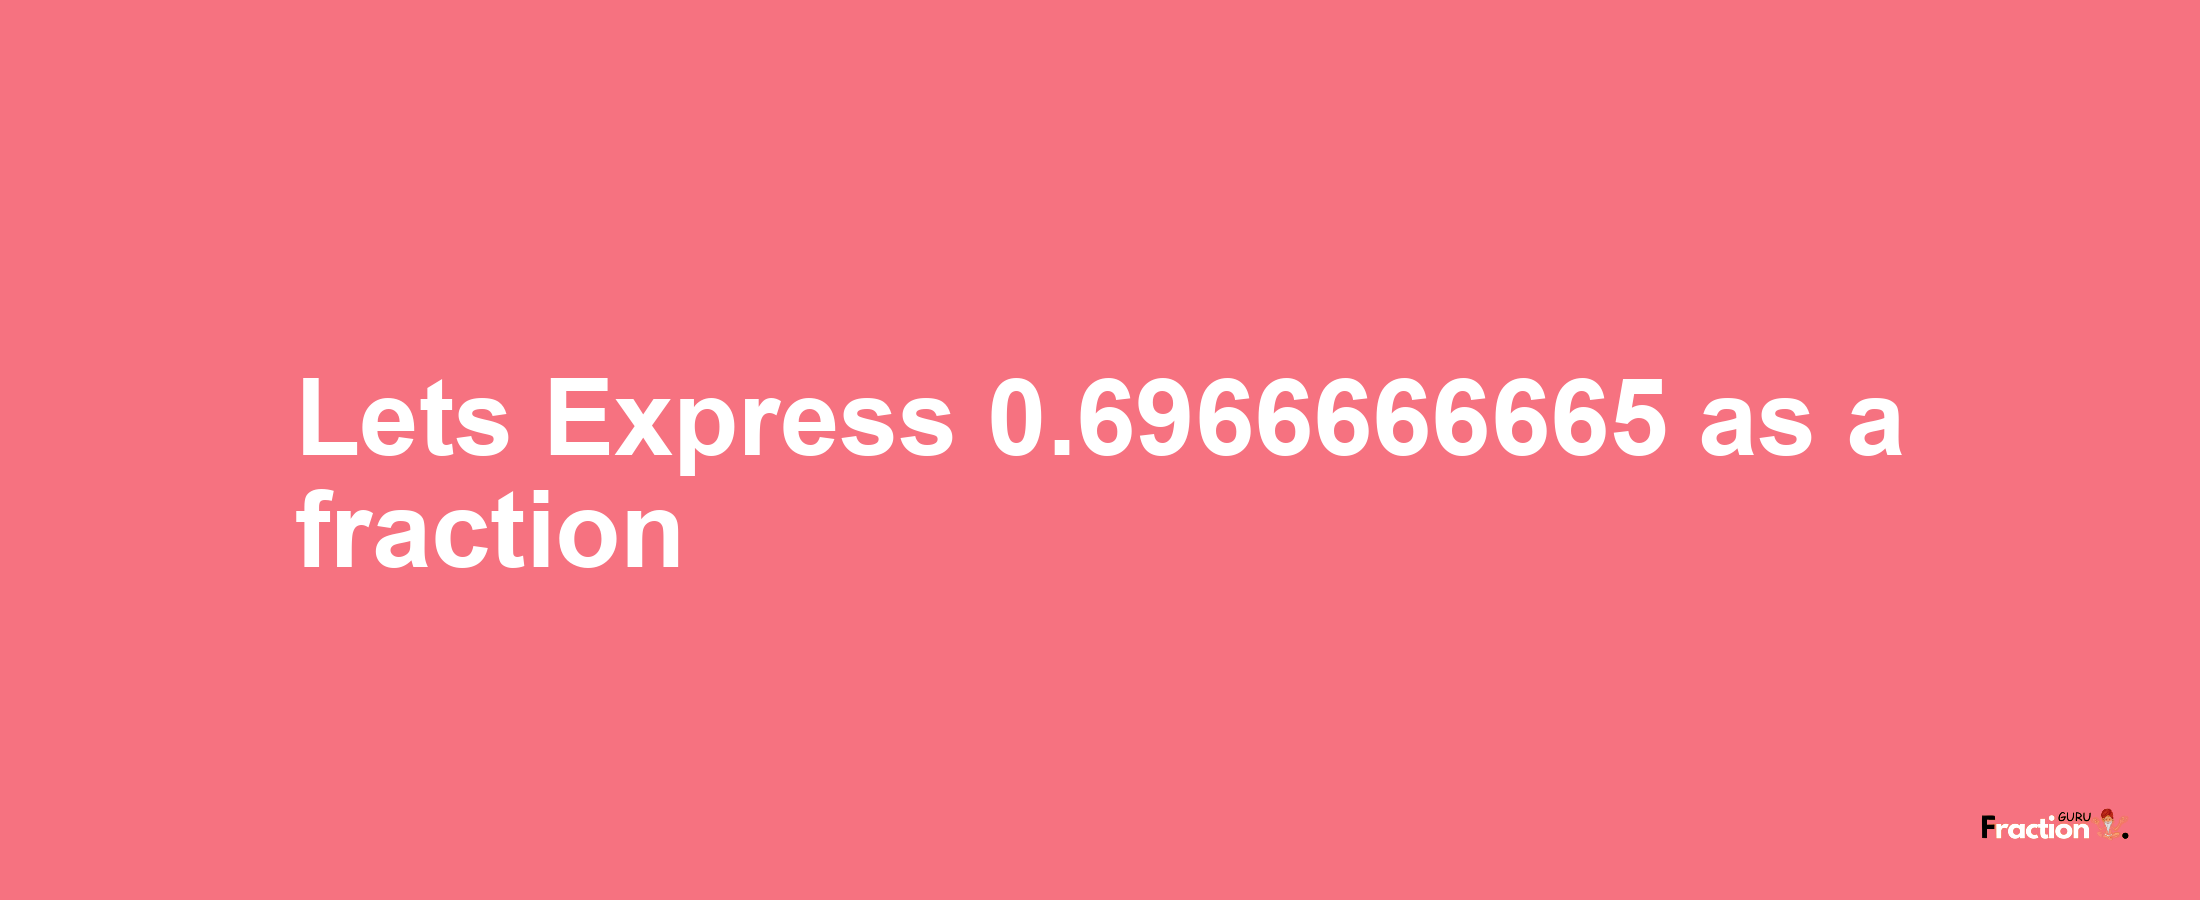 Lets Express 0.6966666665 as afraction